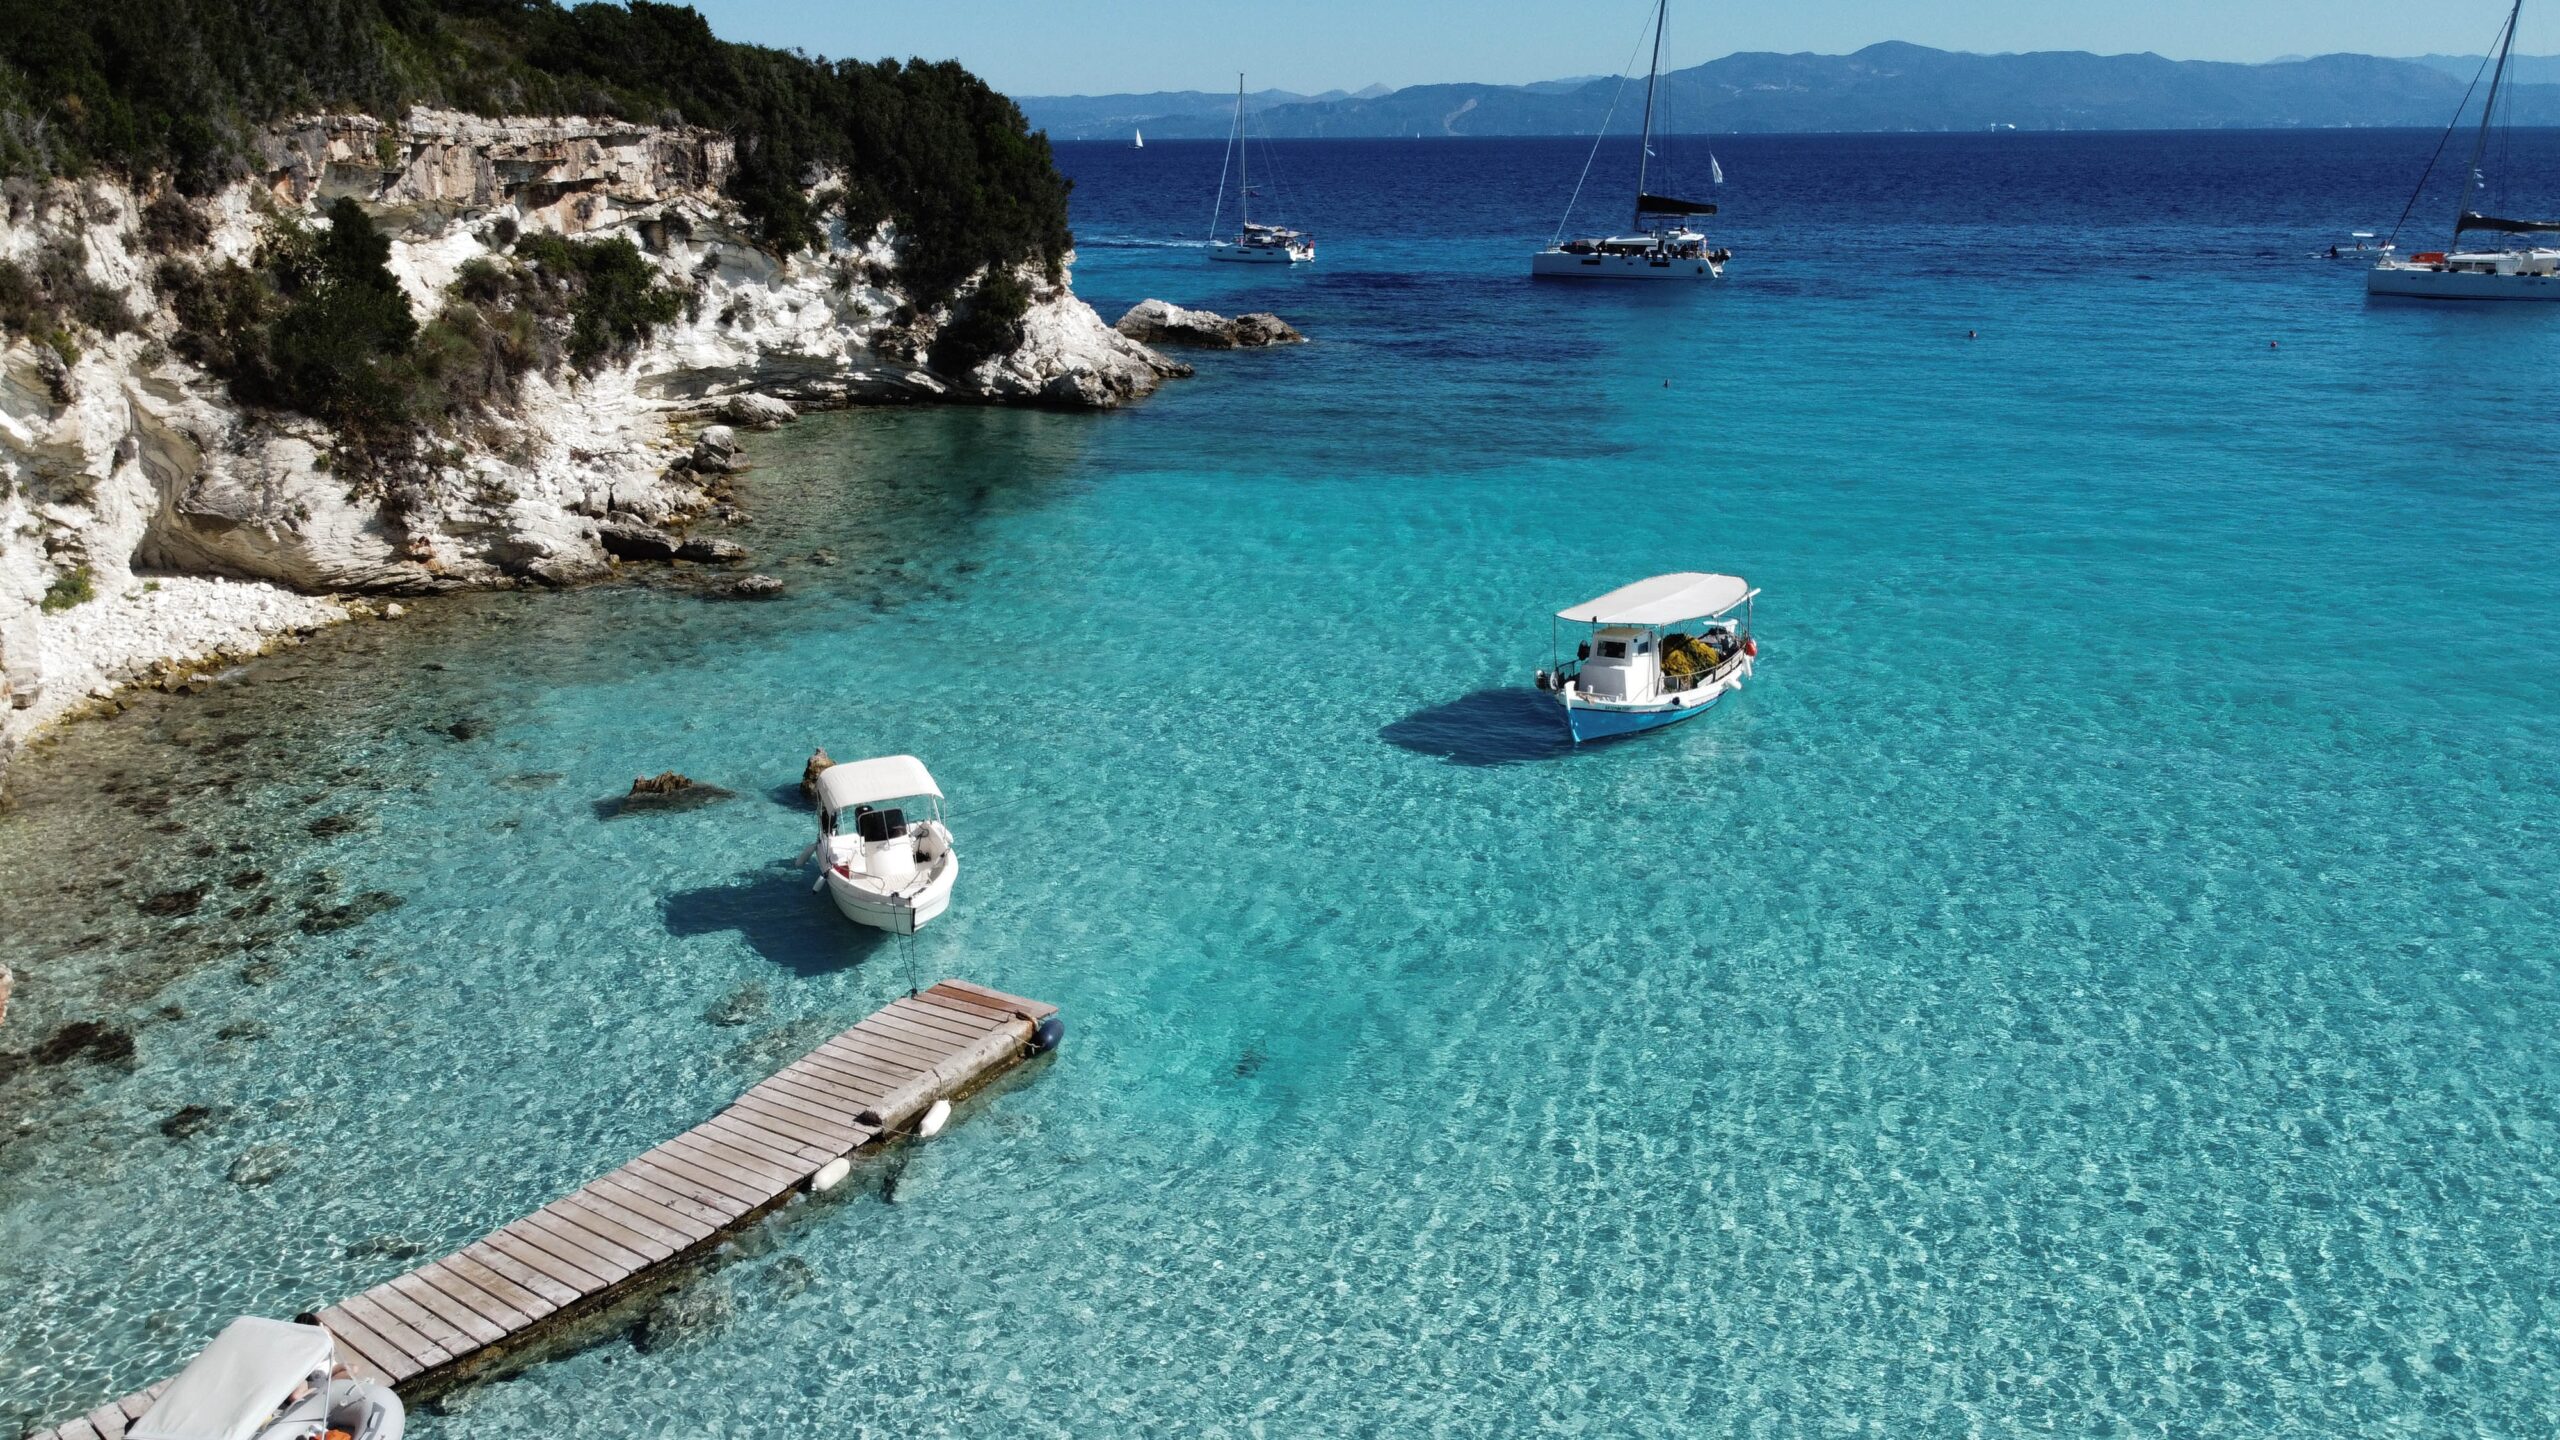 Luxury Villas to rent on Paxos with the clearest turquoise blue water imaginable